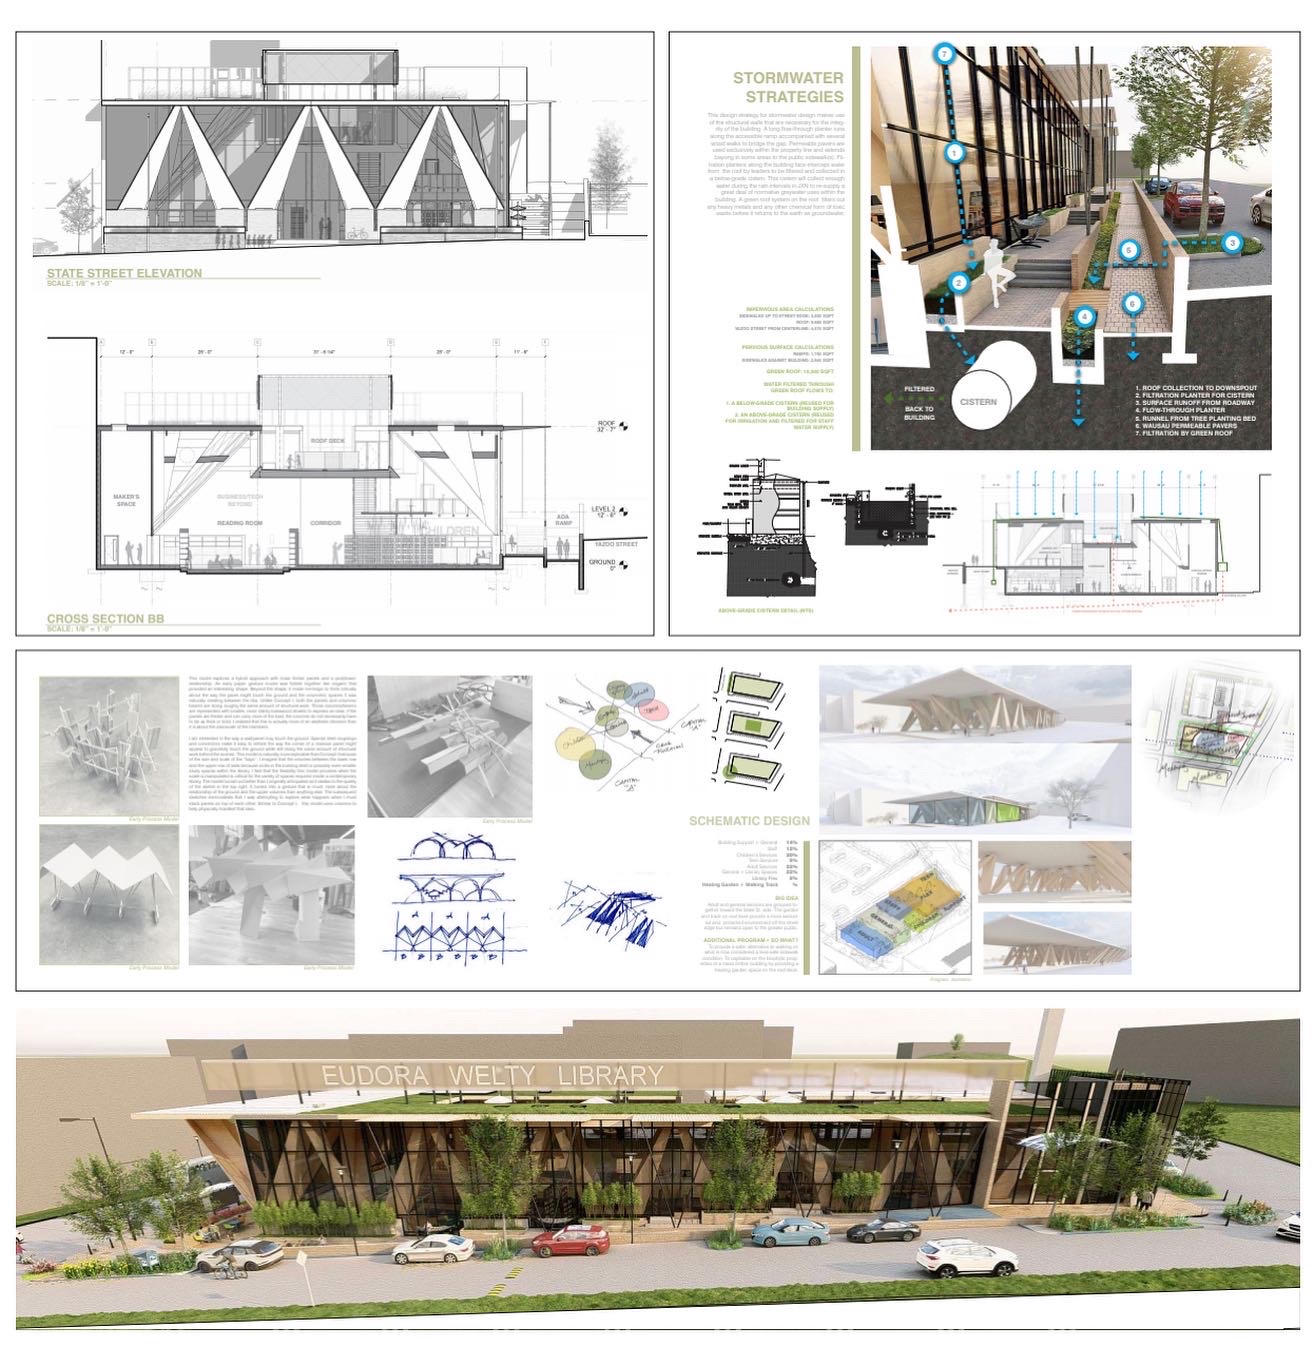 architectural project board image by Jacob Lindley